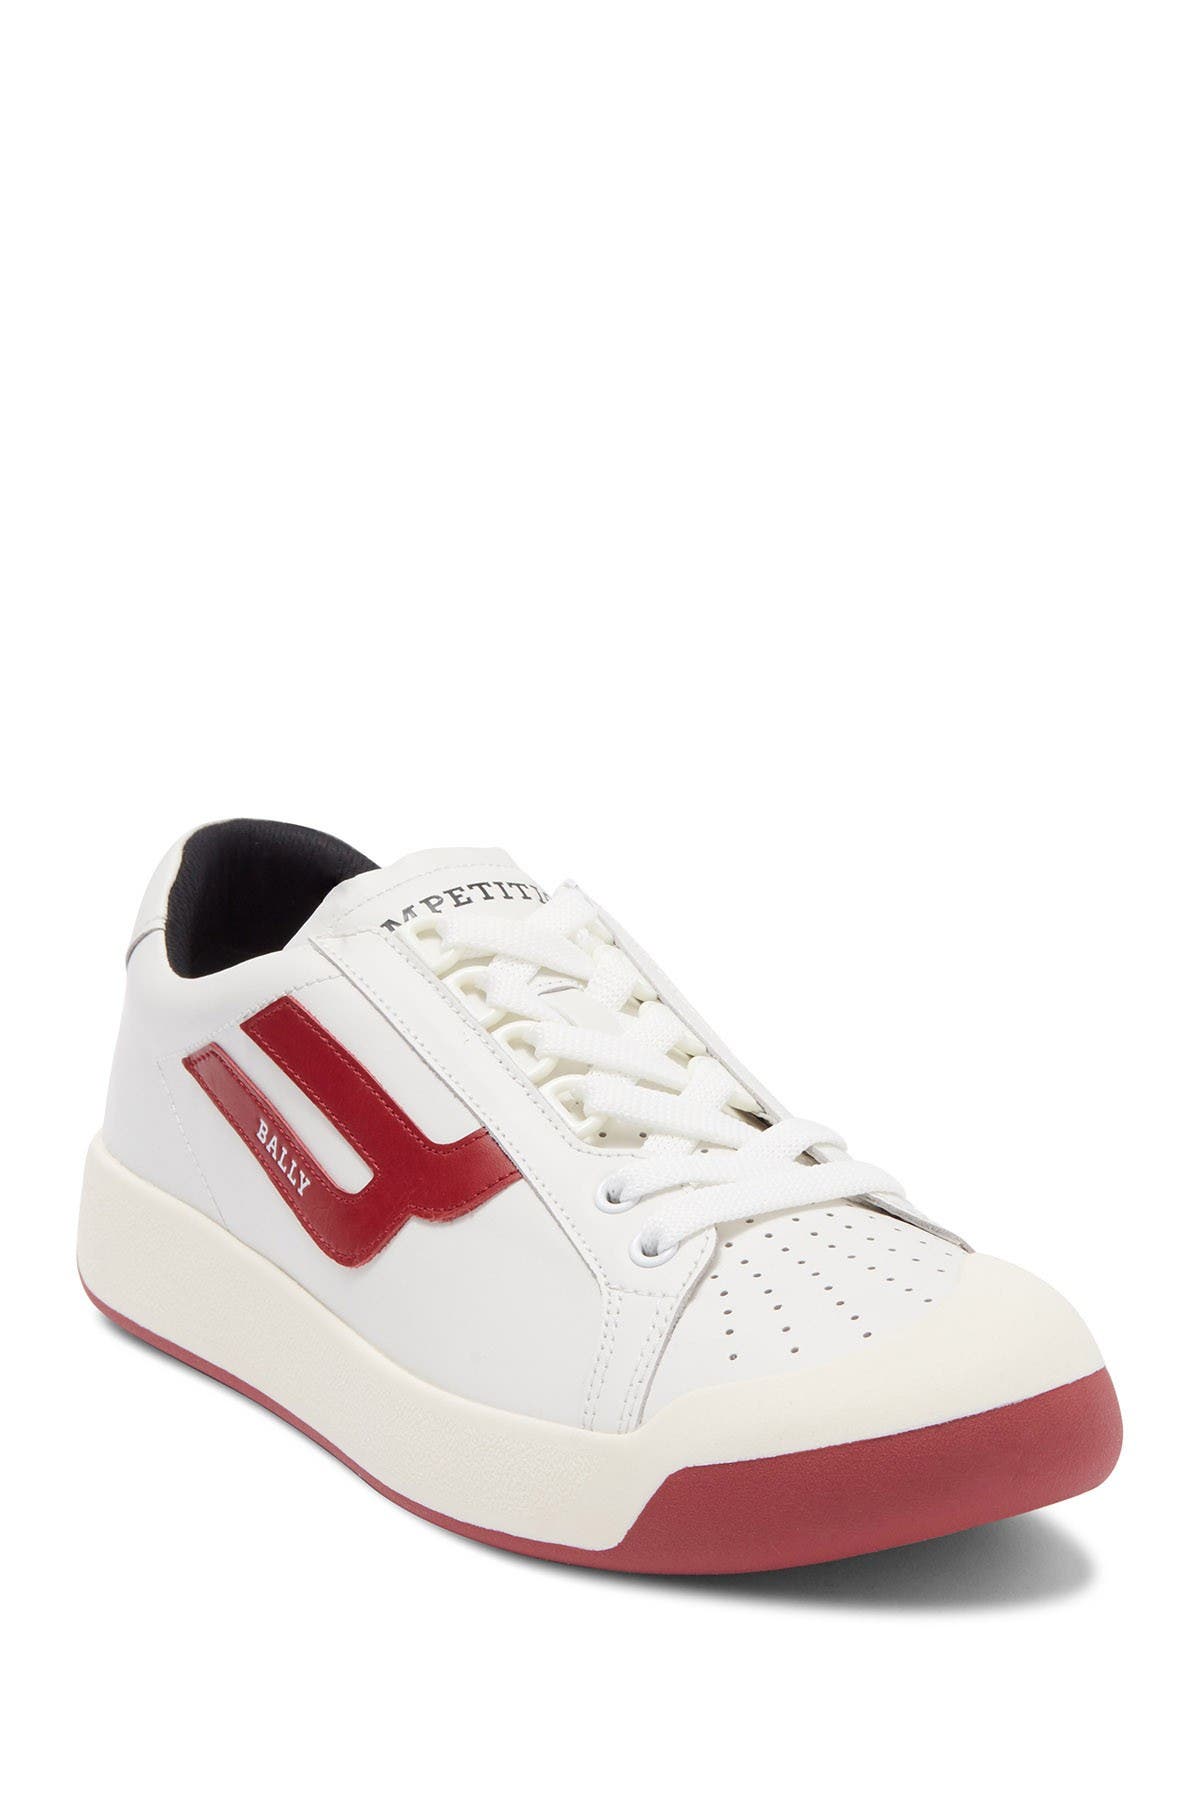 bally sneakers nordstrom